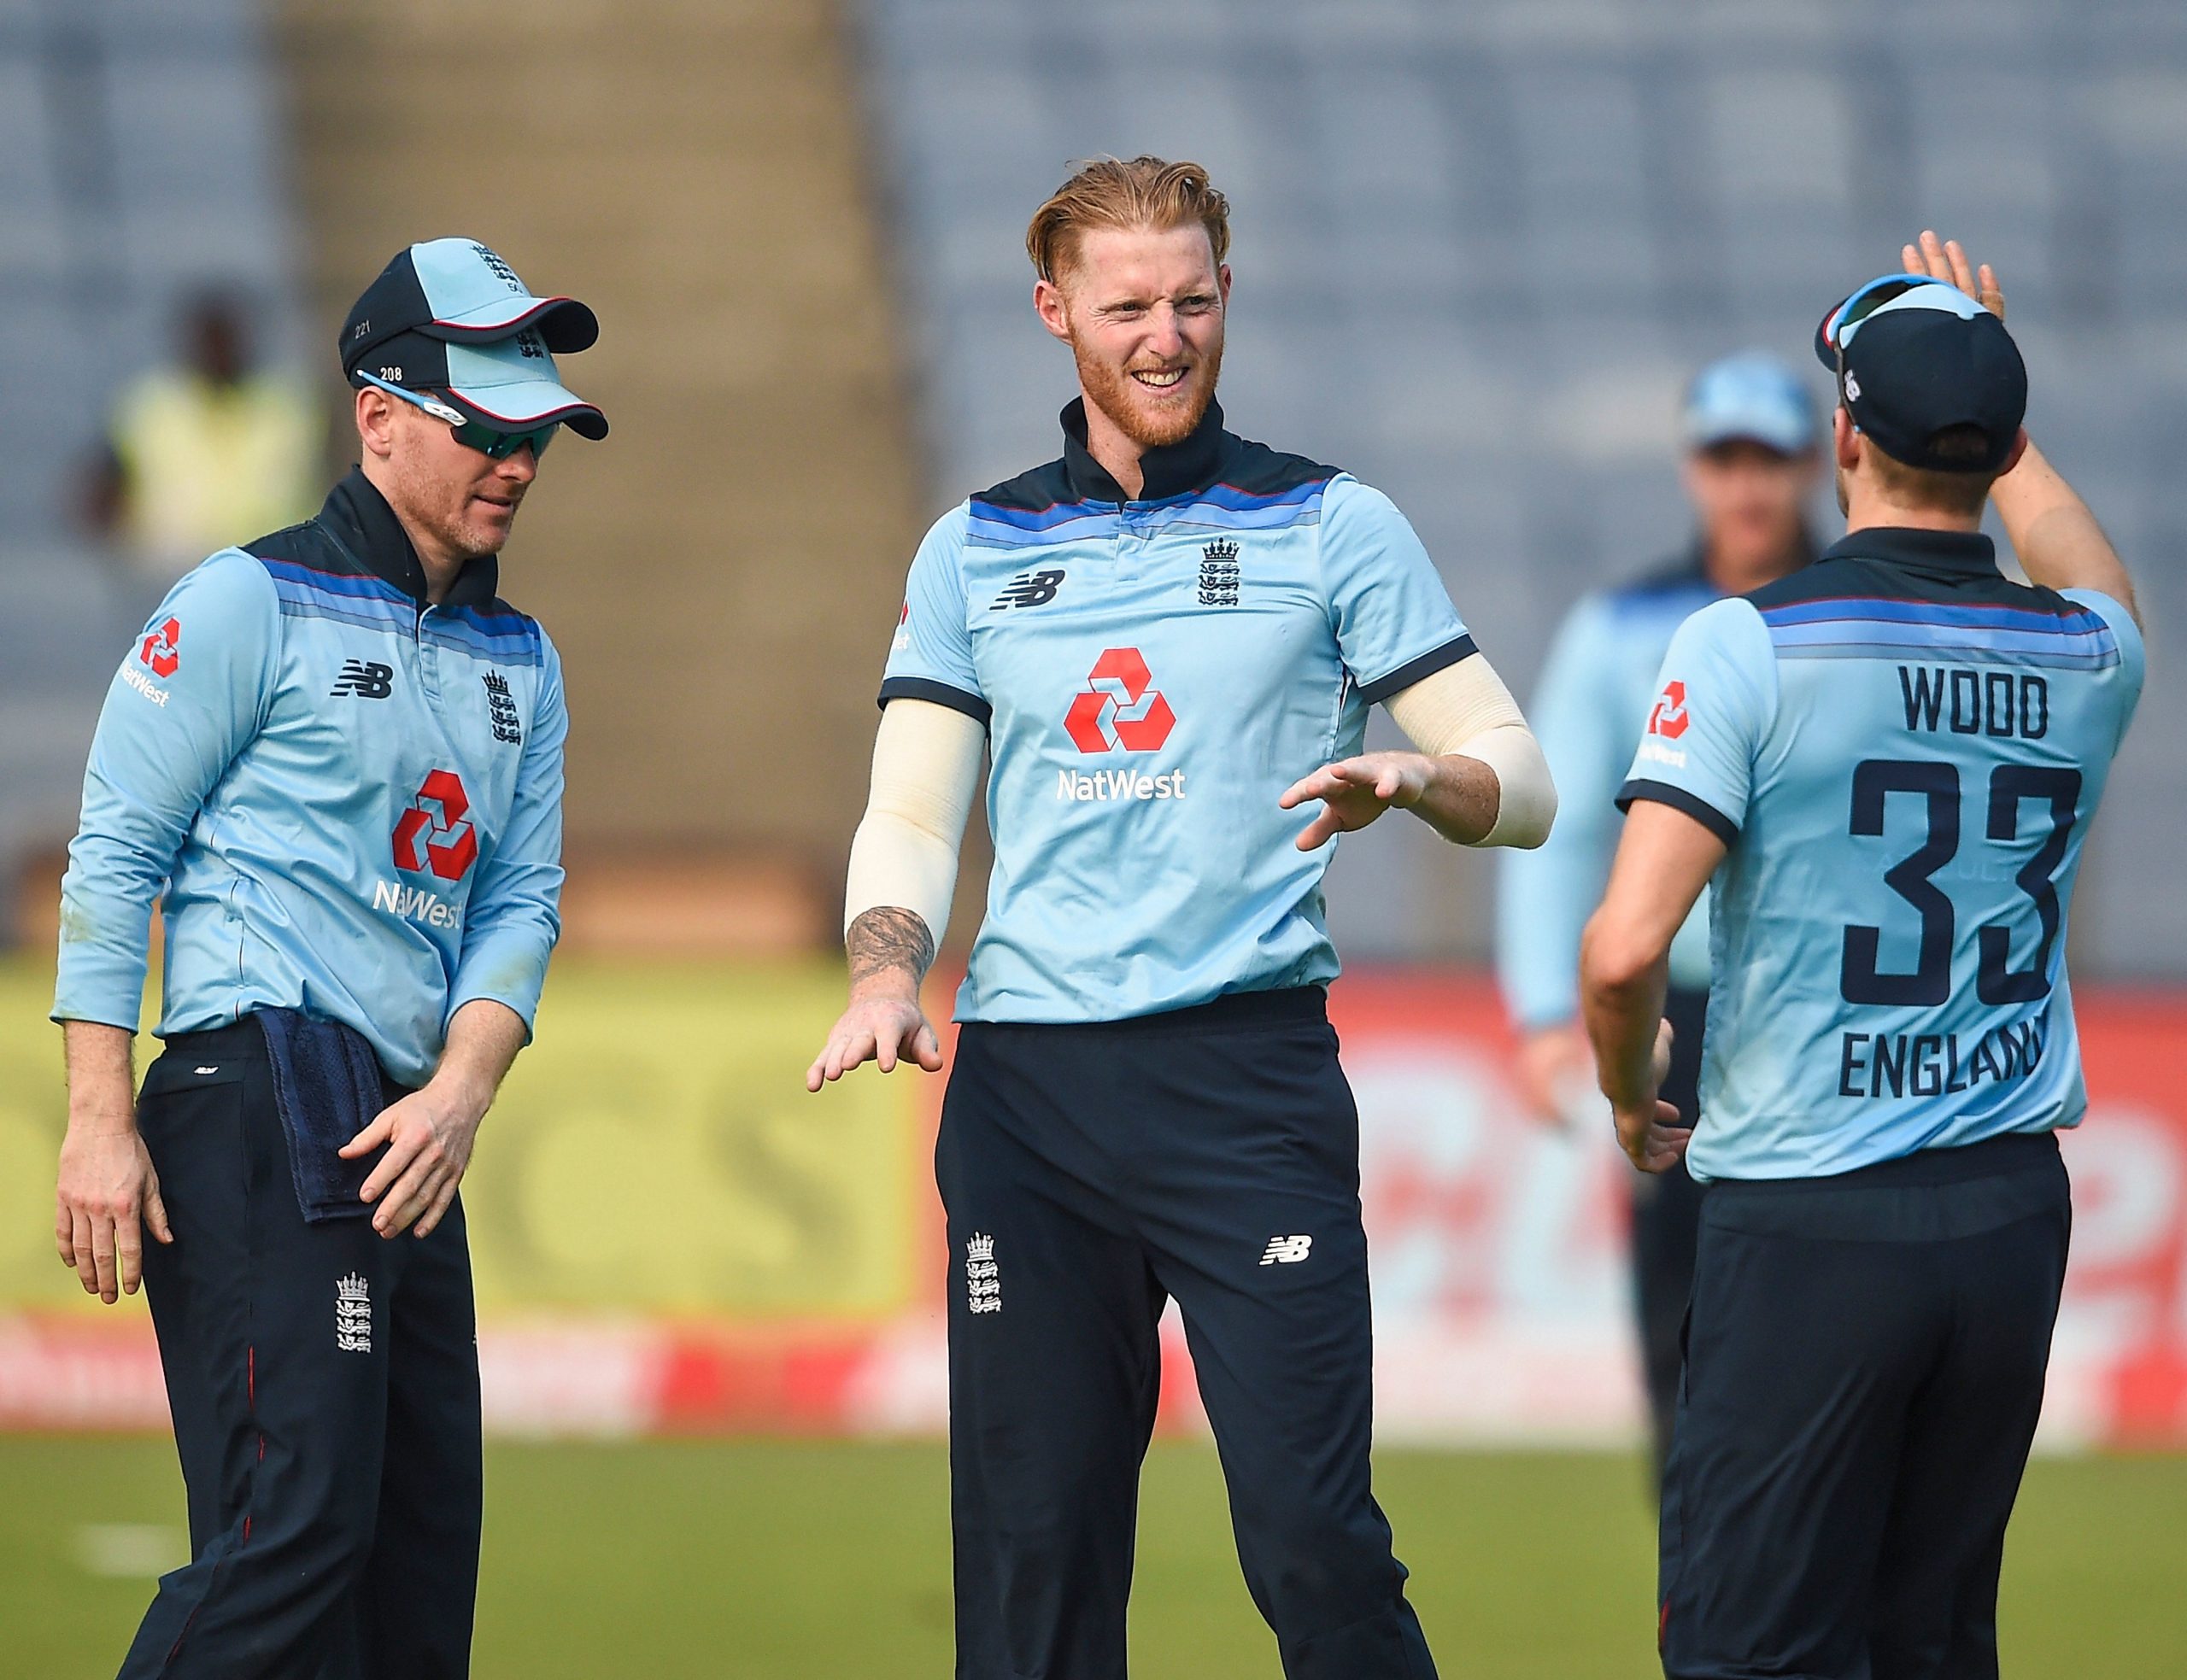 2nd ODI: Ben Stokes warned after being caught applying saliva on ball